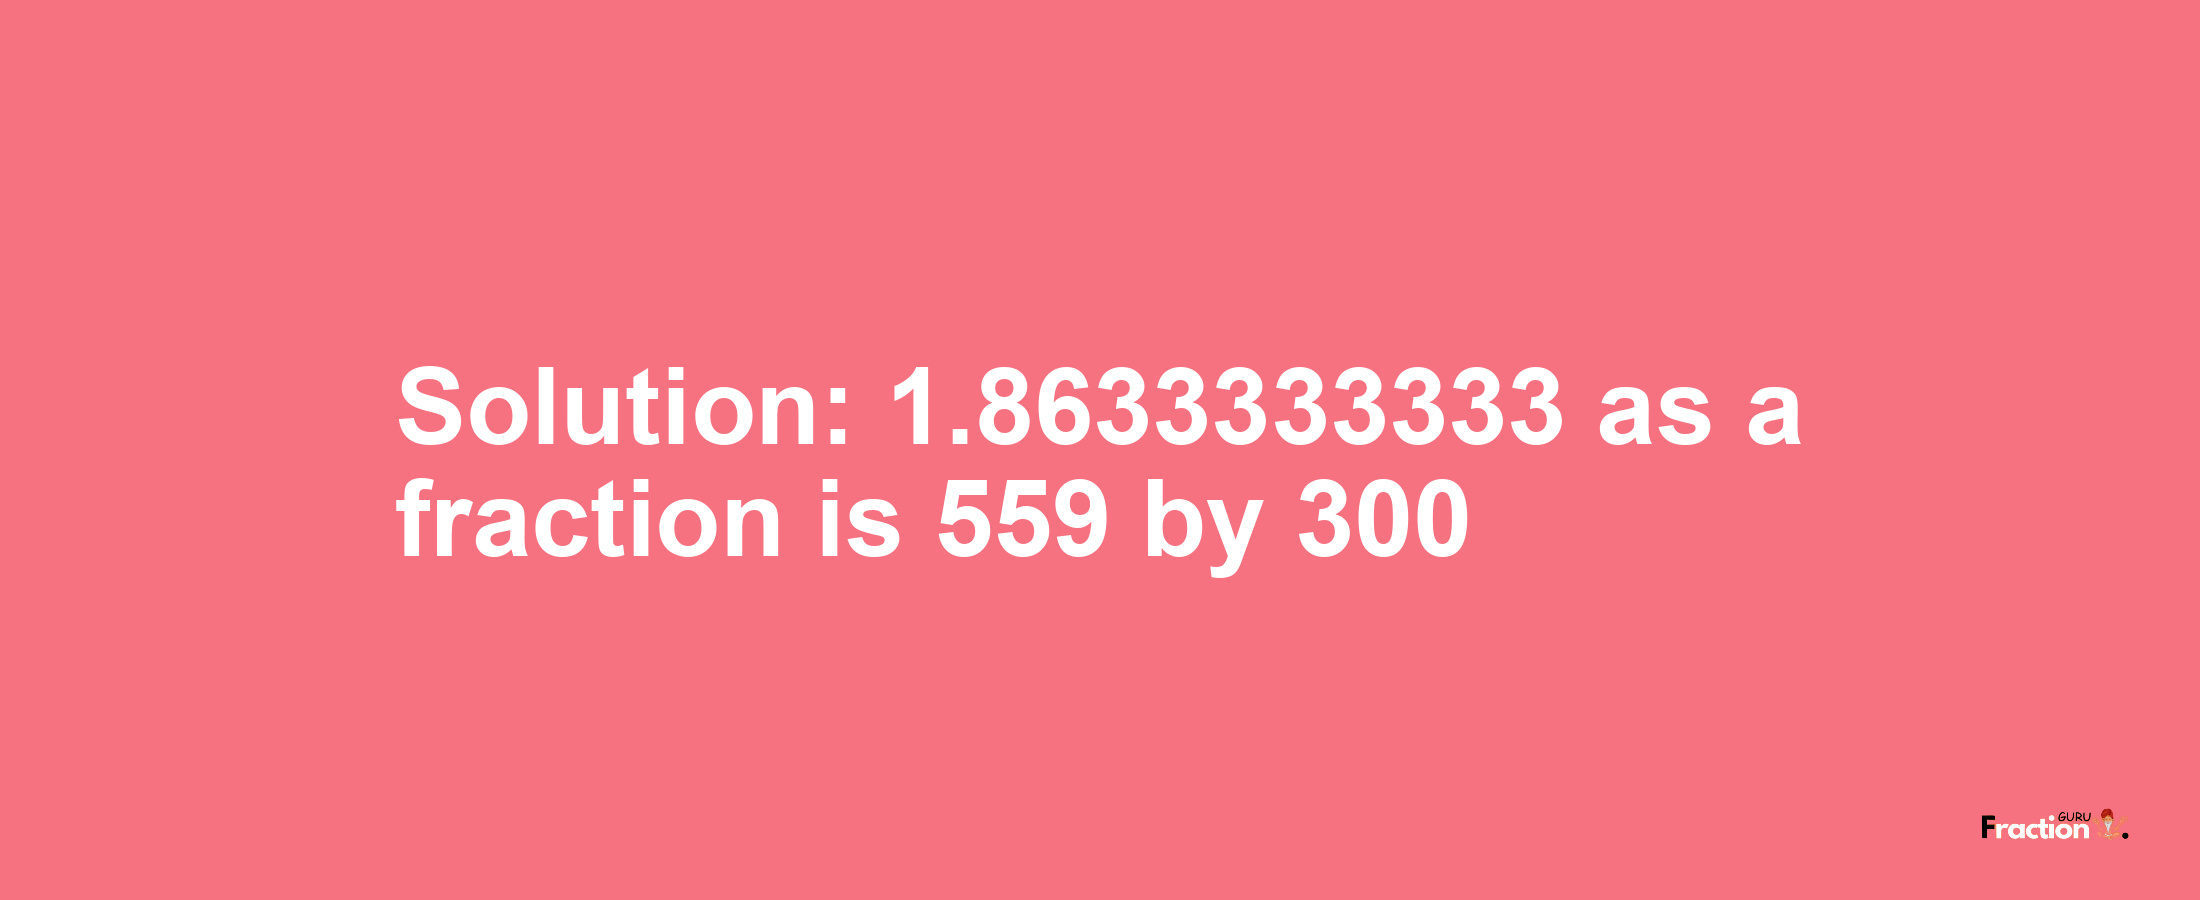 Solution:1.8633333333 as a fraction is 559/300